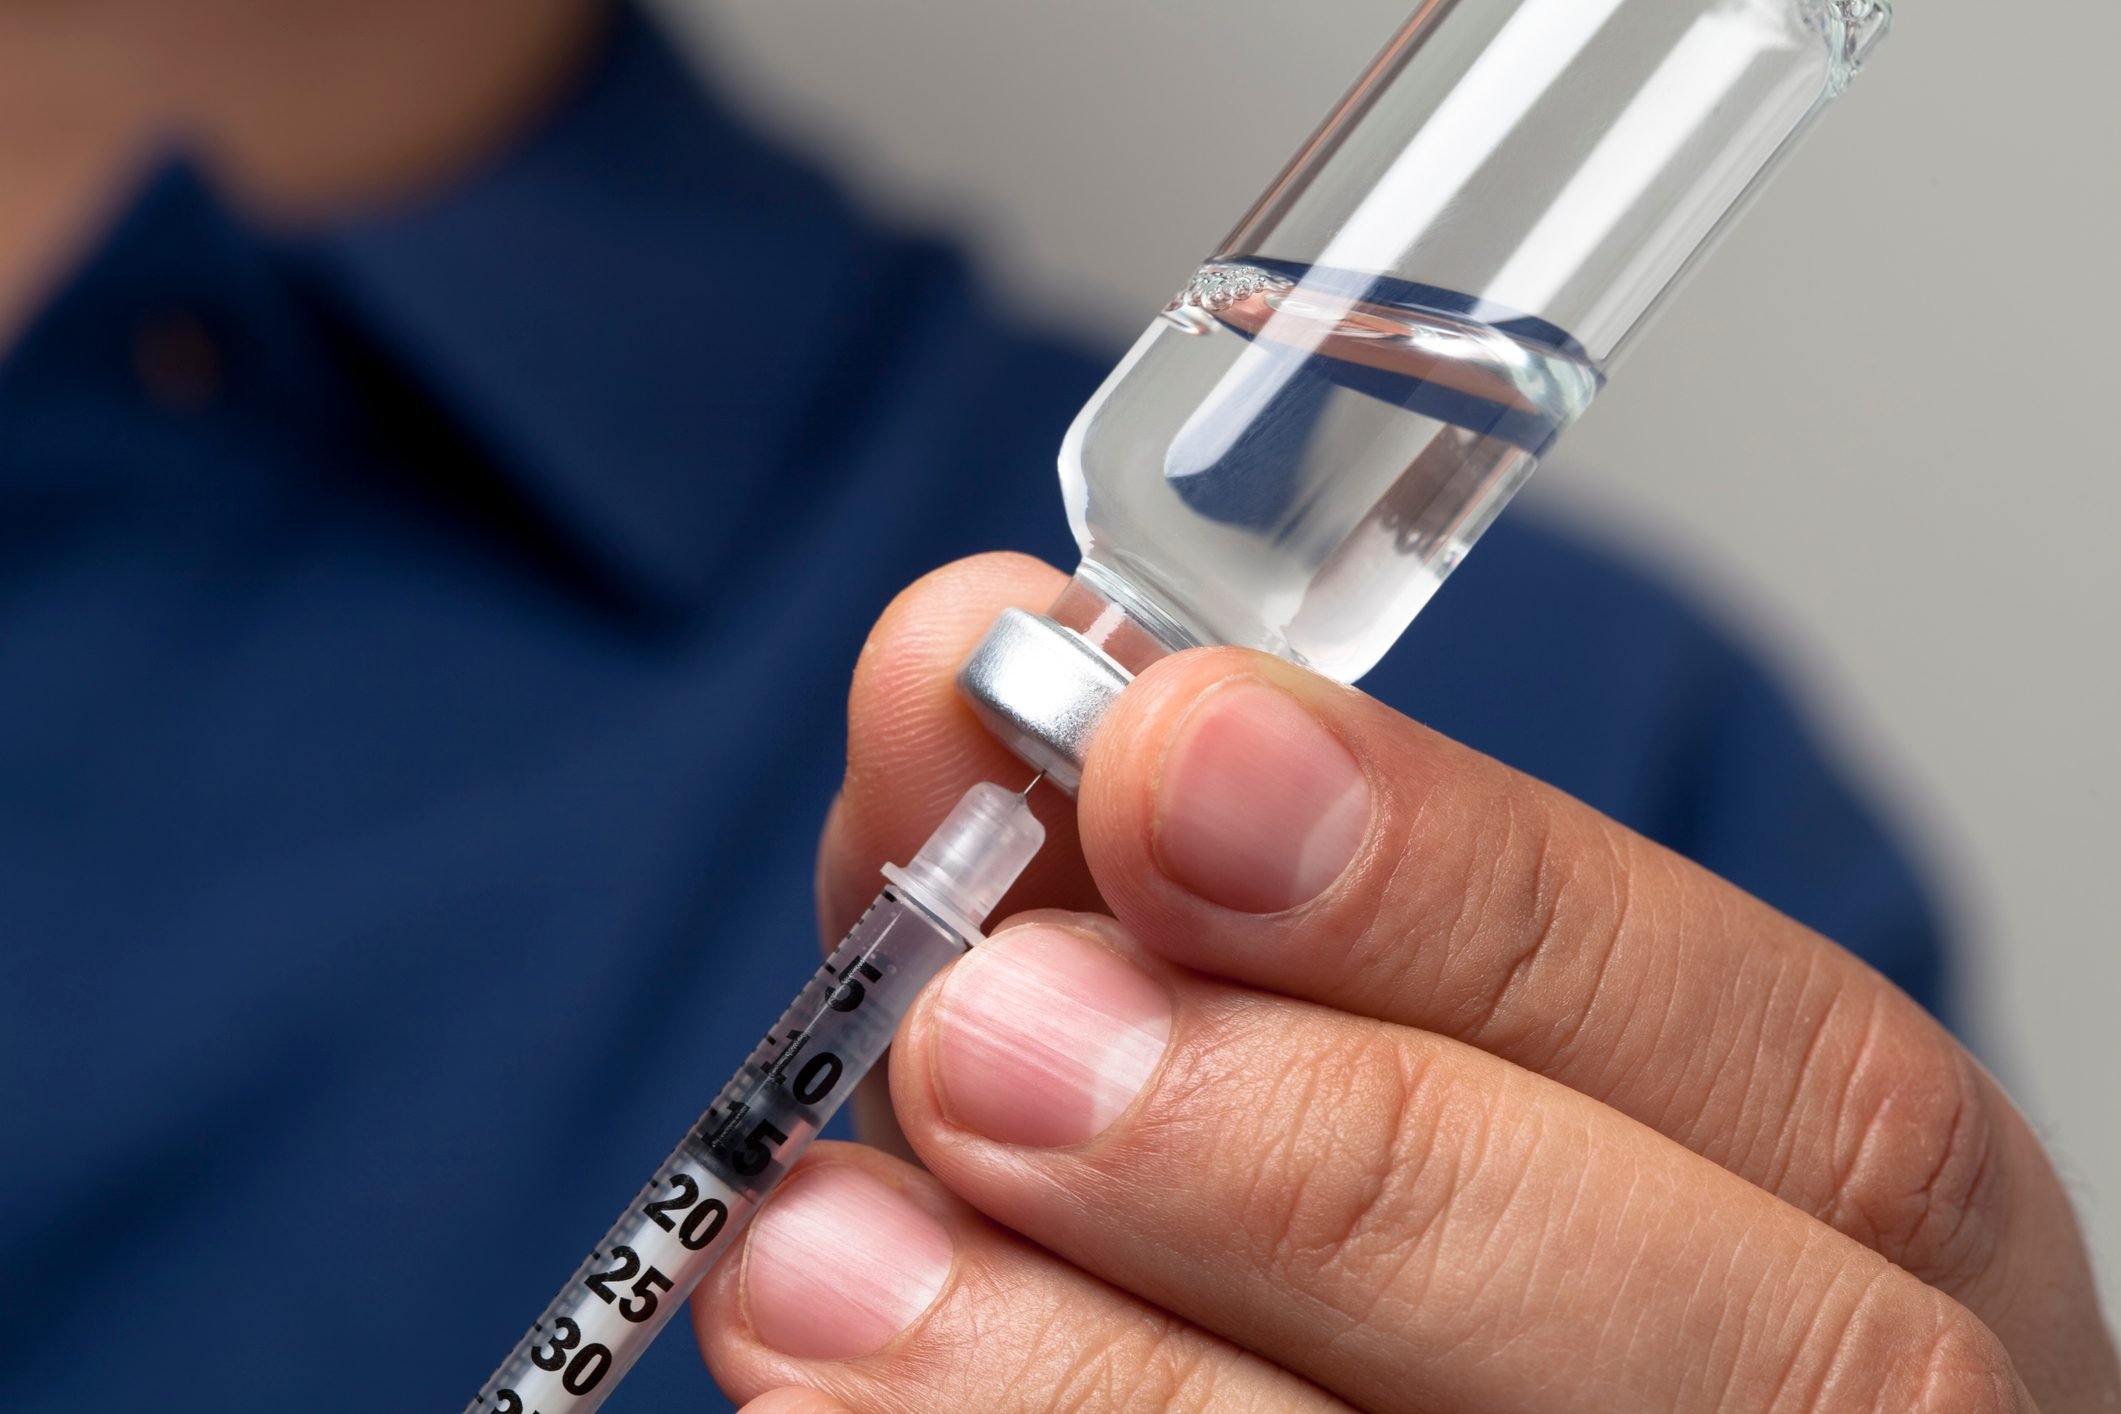 Insulin Prices Are Going Down by 70%—Here's What You Need to Know